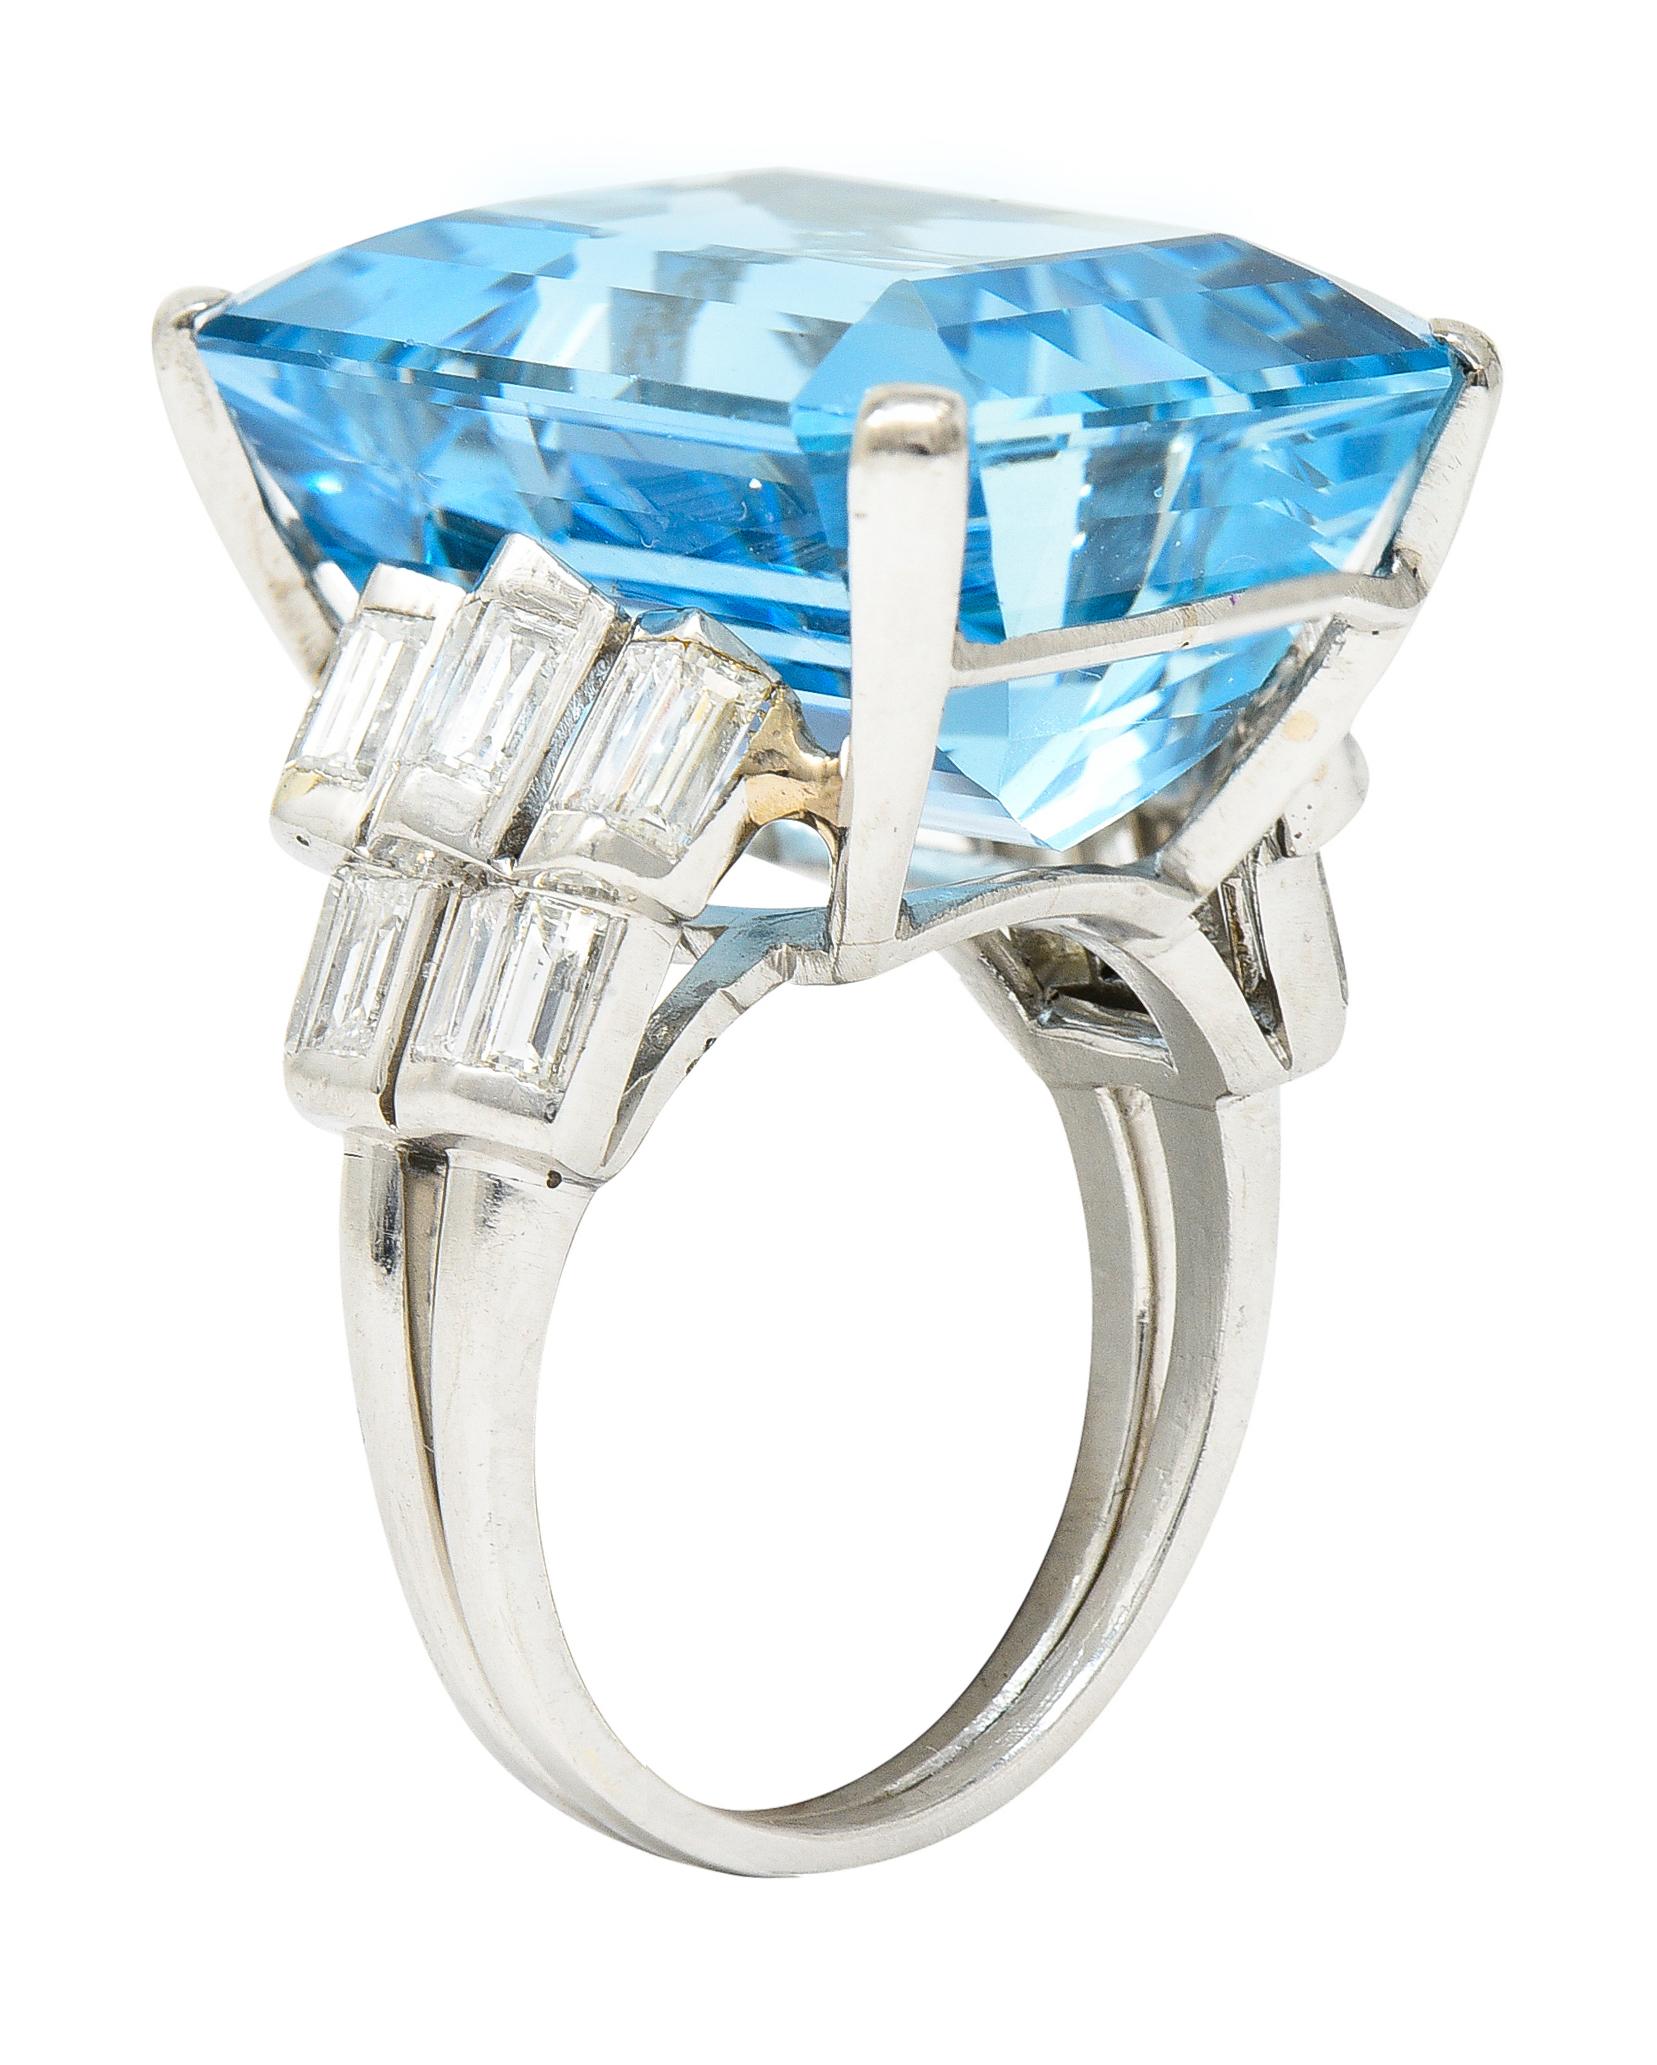 Centering a substantial emerald cut aquamarine weighing approximately 23.76 carats total. Transparent light to medium blue in color - prong set in wire basket. Flanked by stepped chevron motif cathedral shoulders. Bar set throughout with baguette